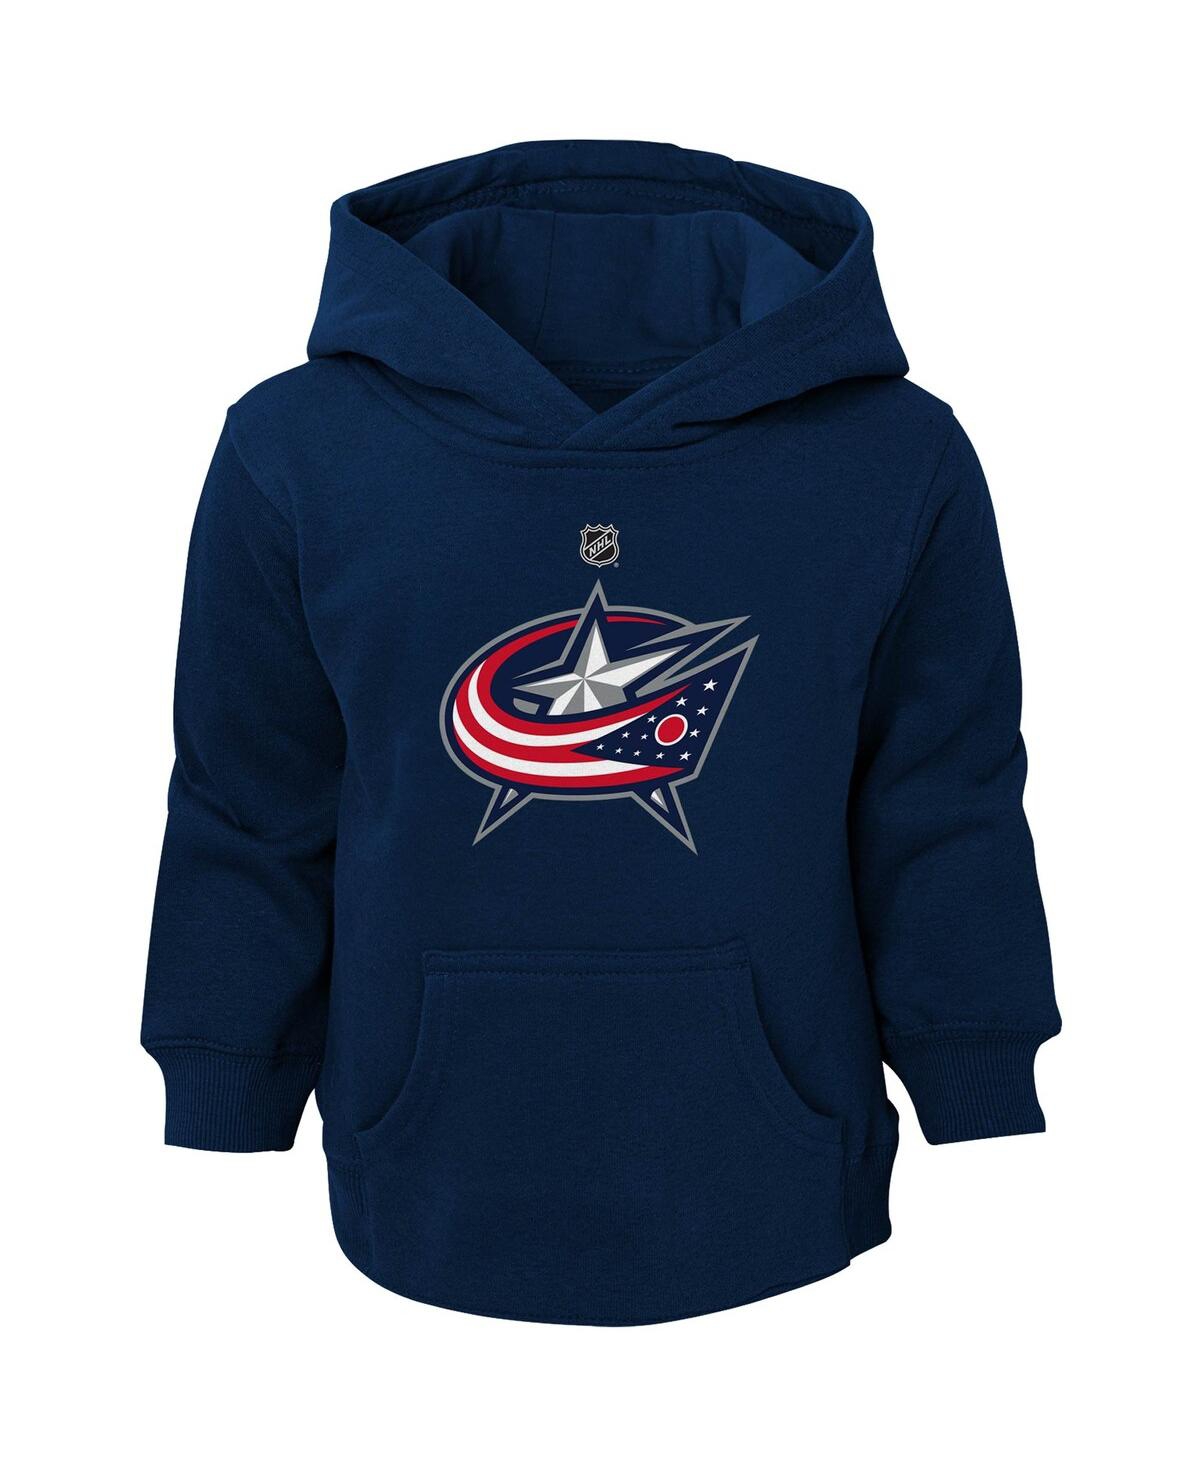 Shop Outerstuff Toddler Boys And Girls Navy Columbus Blue Jackets Primary Logo Pullover Hoodie